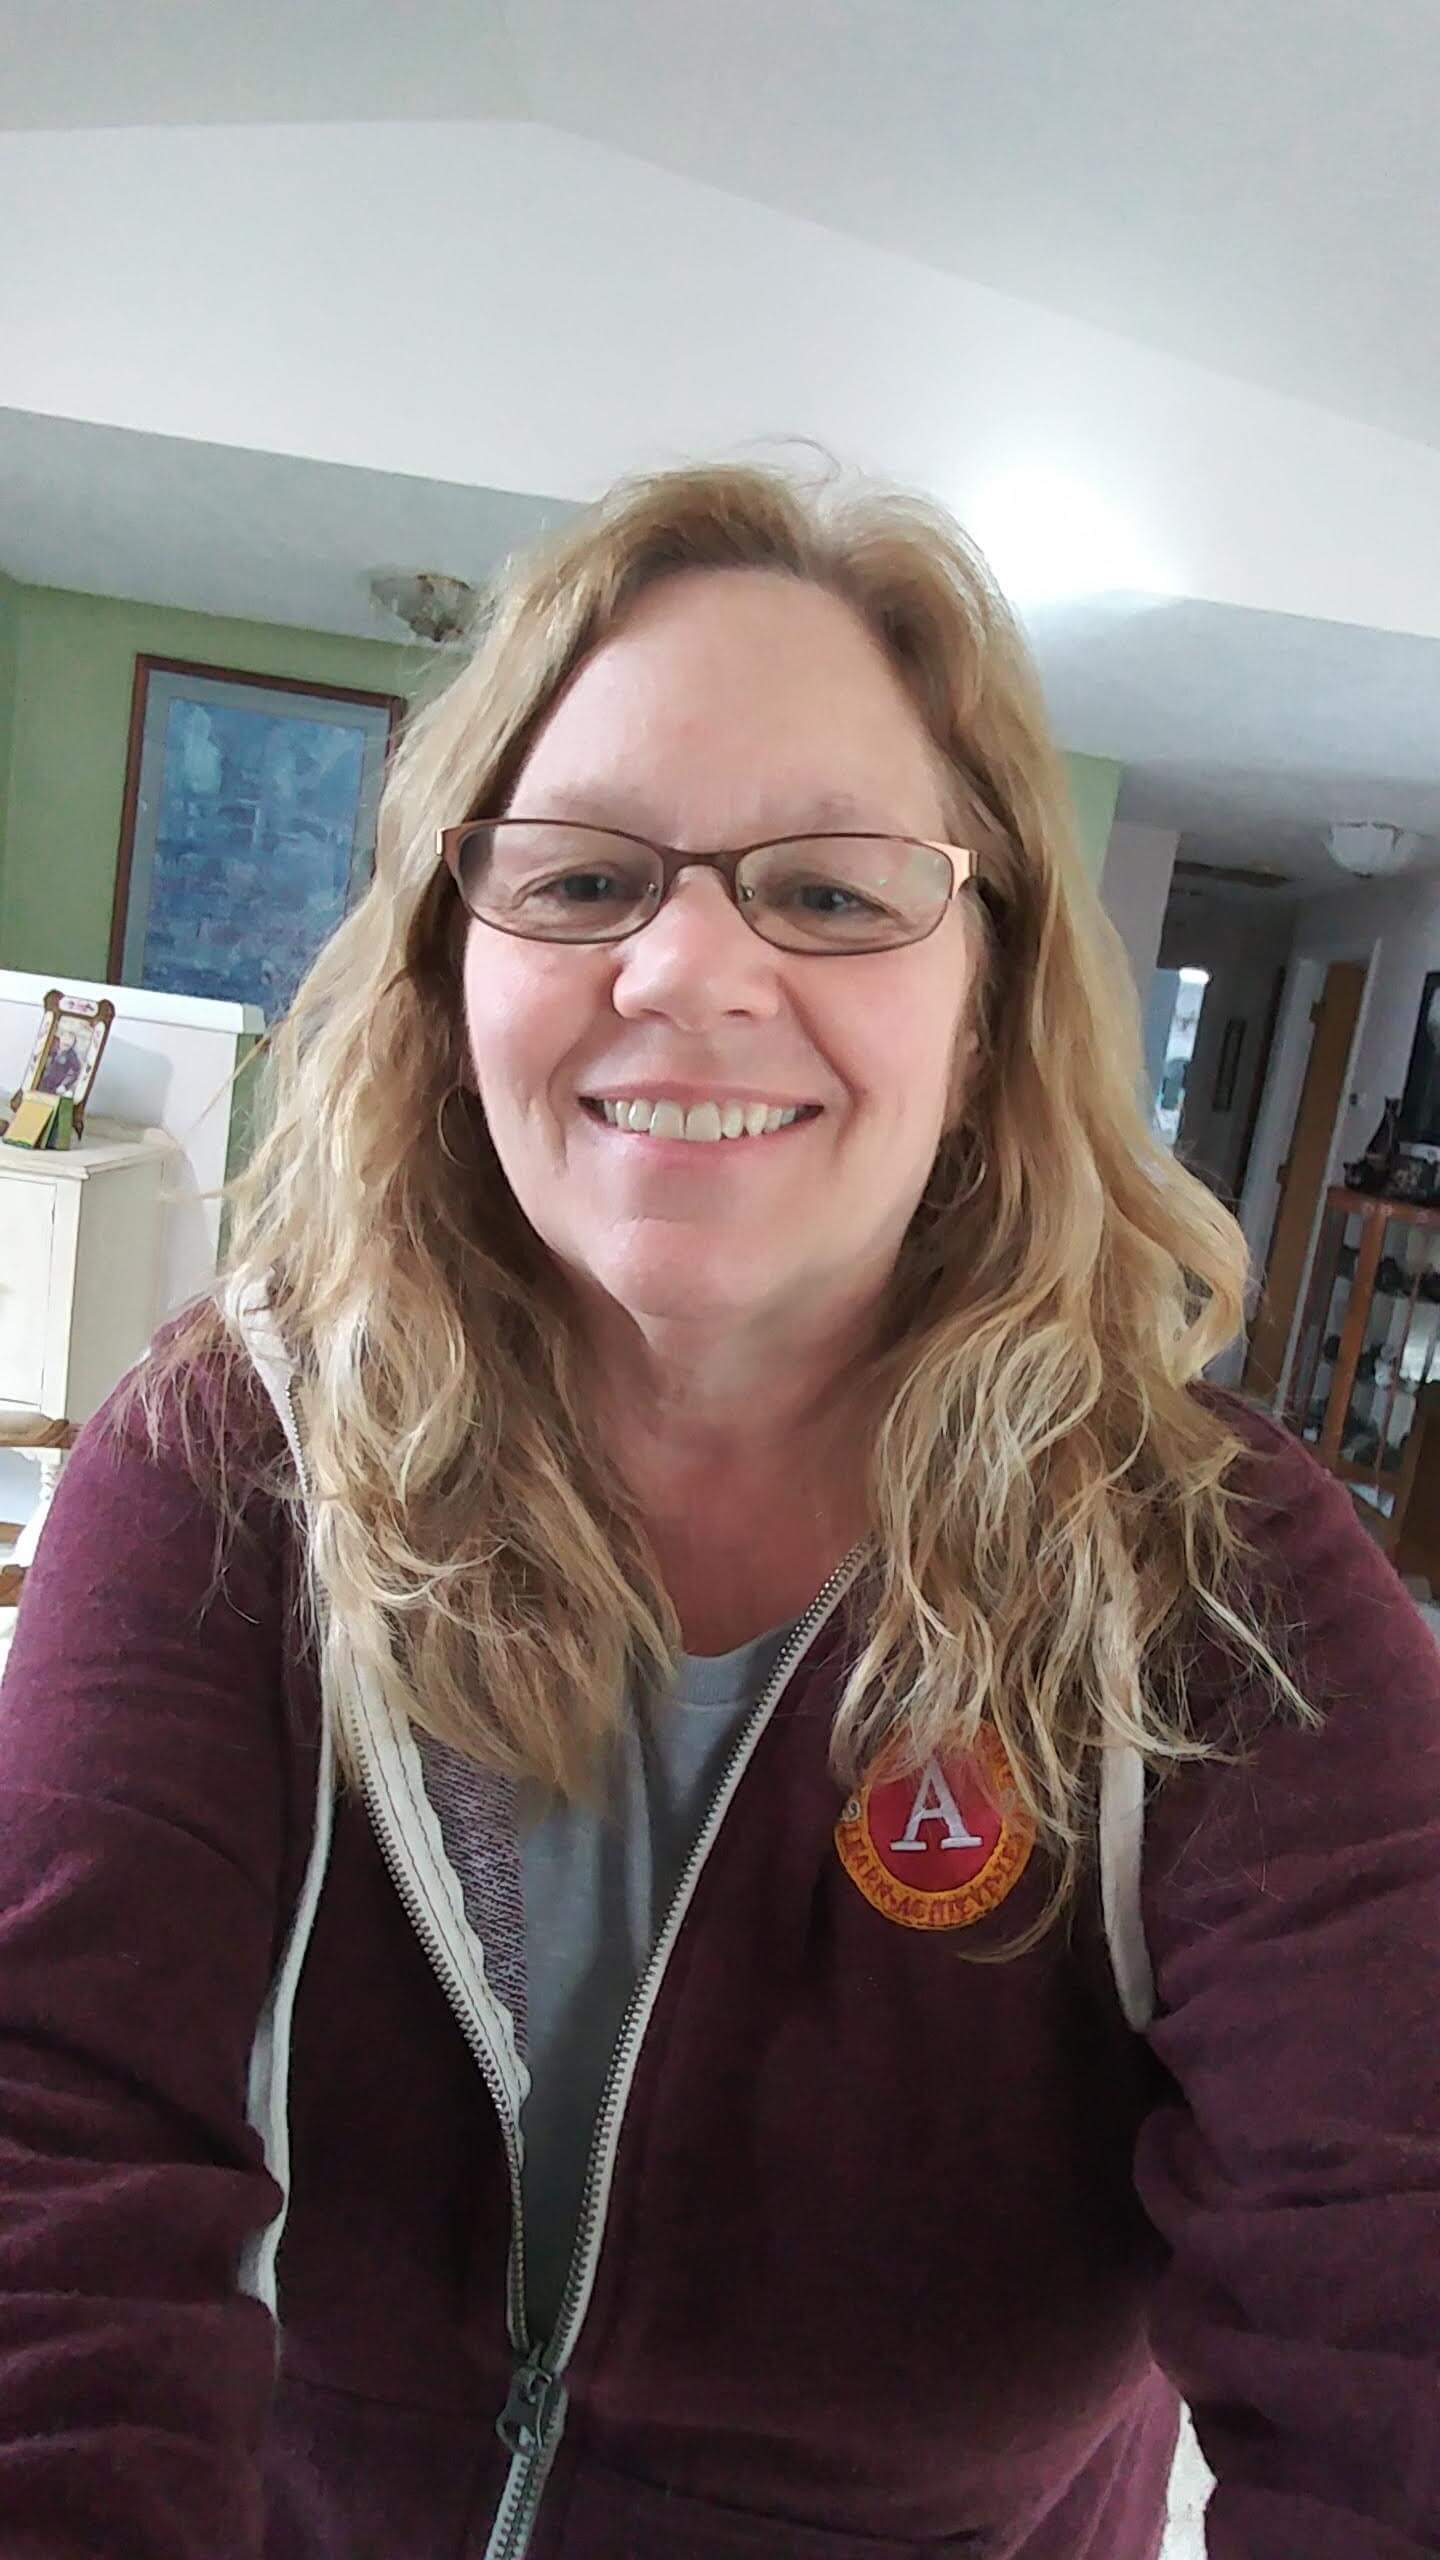 Janette wearing an Abiqua sweatshirt, smiling in her home.